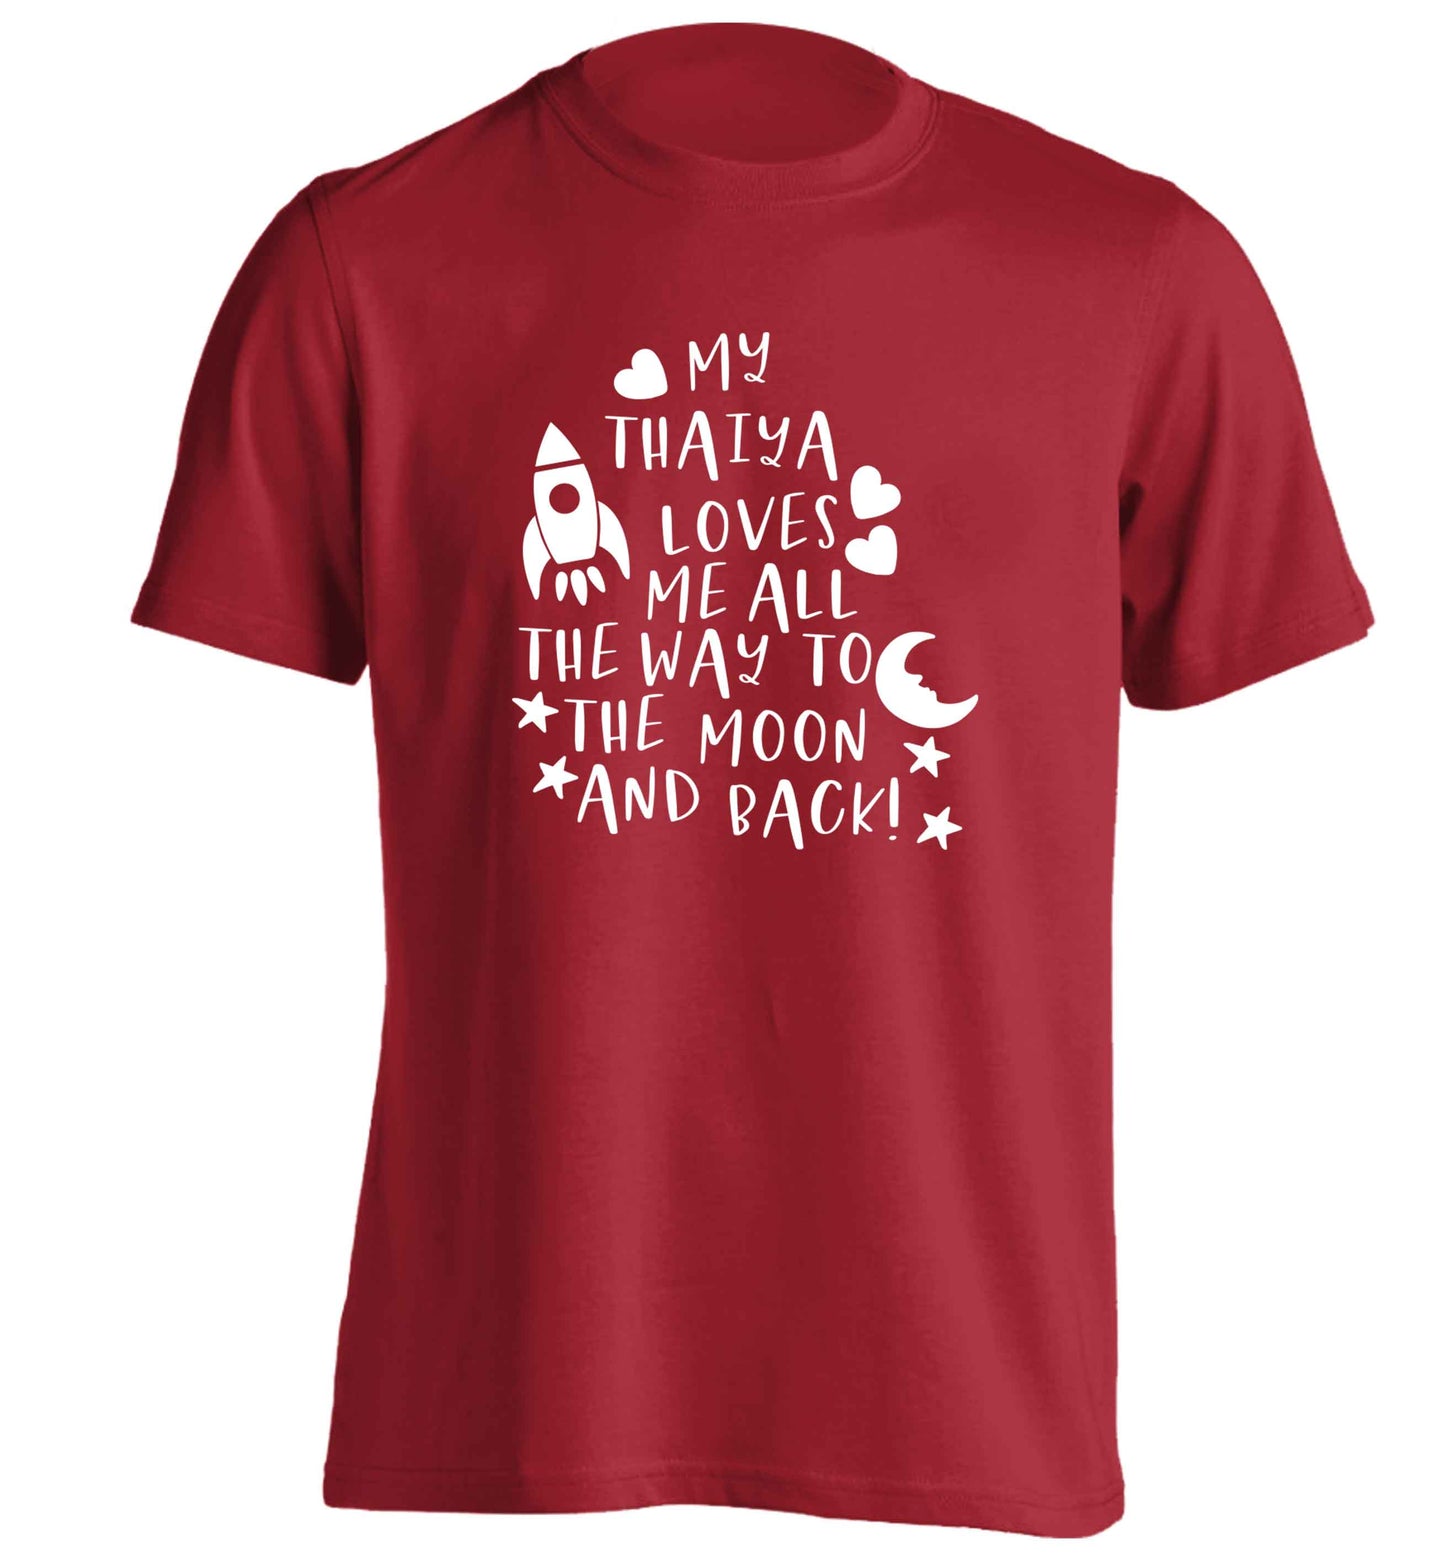 My thaiya loves me all the way to the moon and back adults unisex red Tshirt 2XL